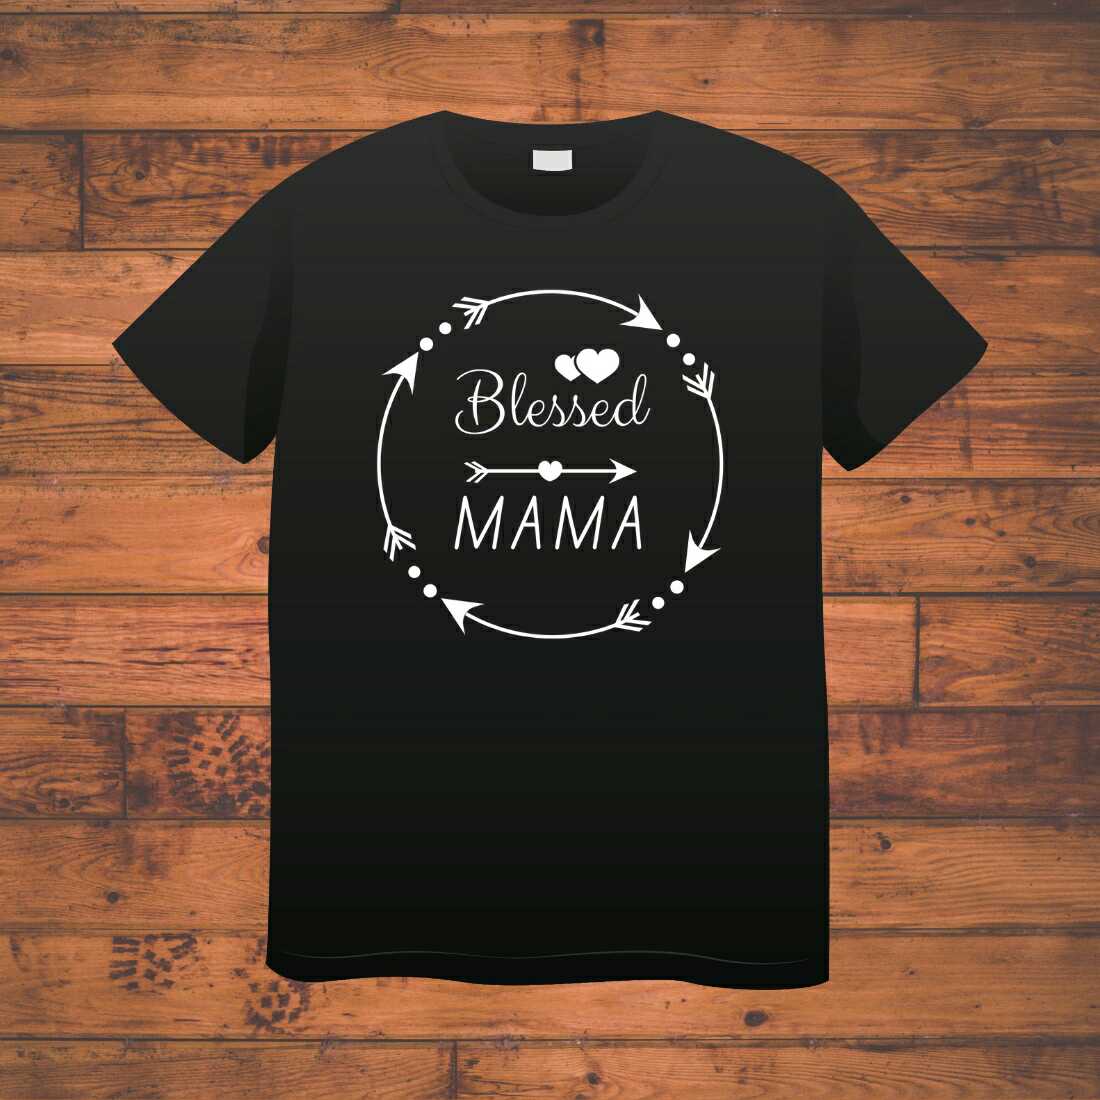 Blessed Mama T-shirt Design cover image.